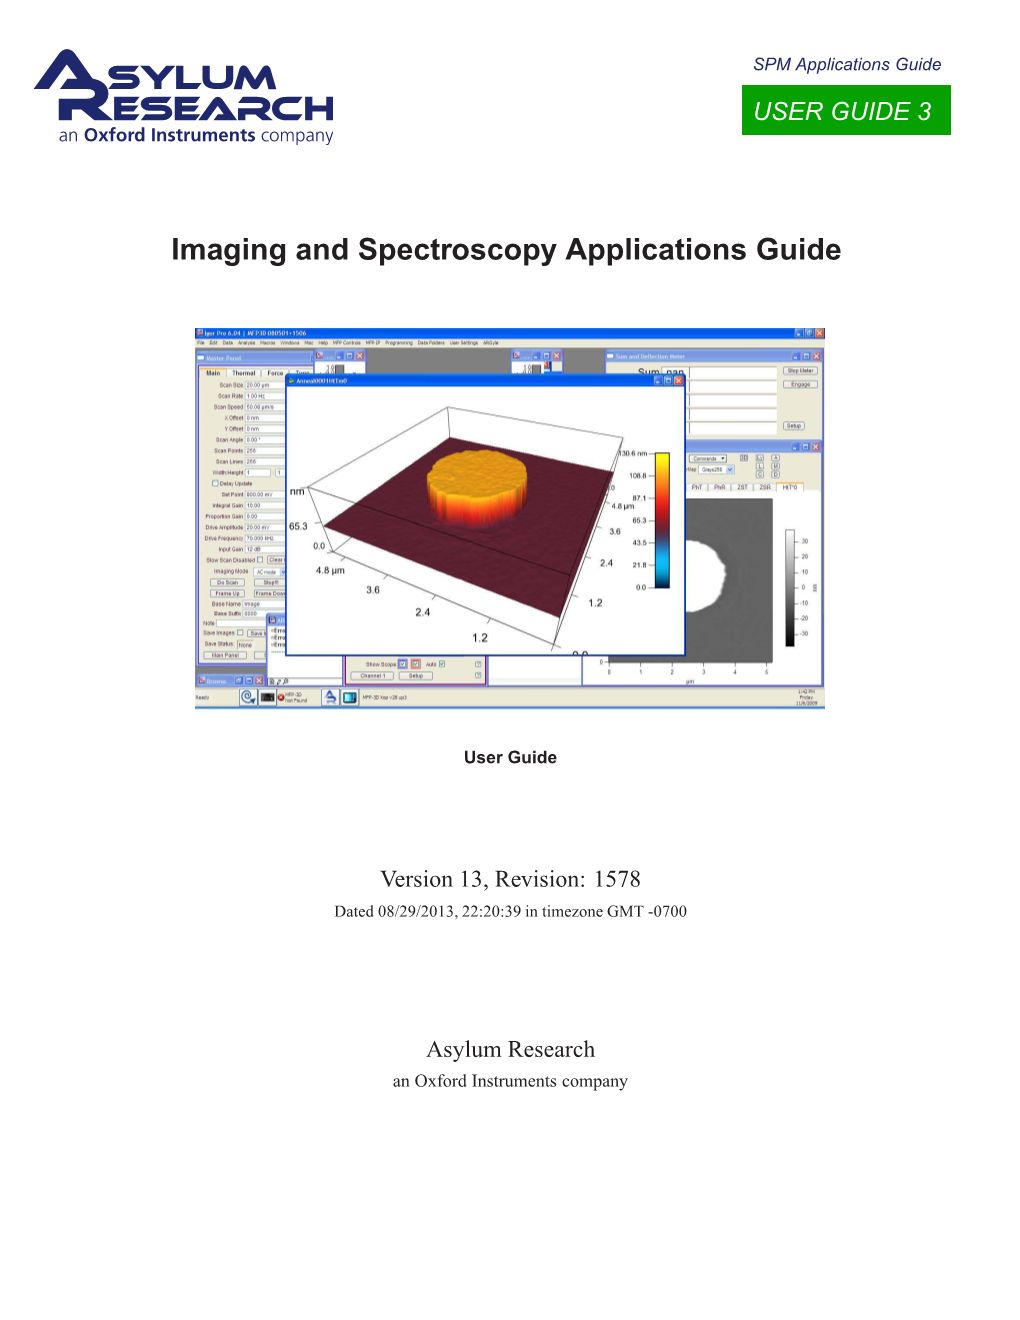 Imaging and Spectroscopy Applications Guide 0.5In [Width